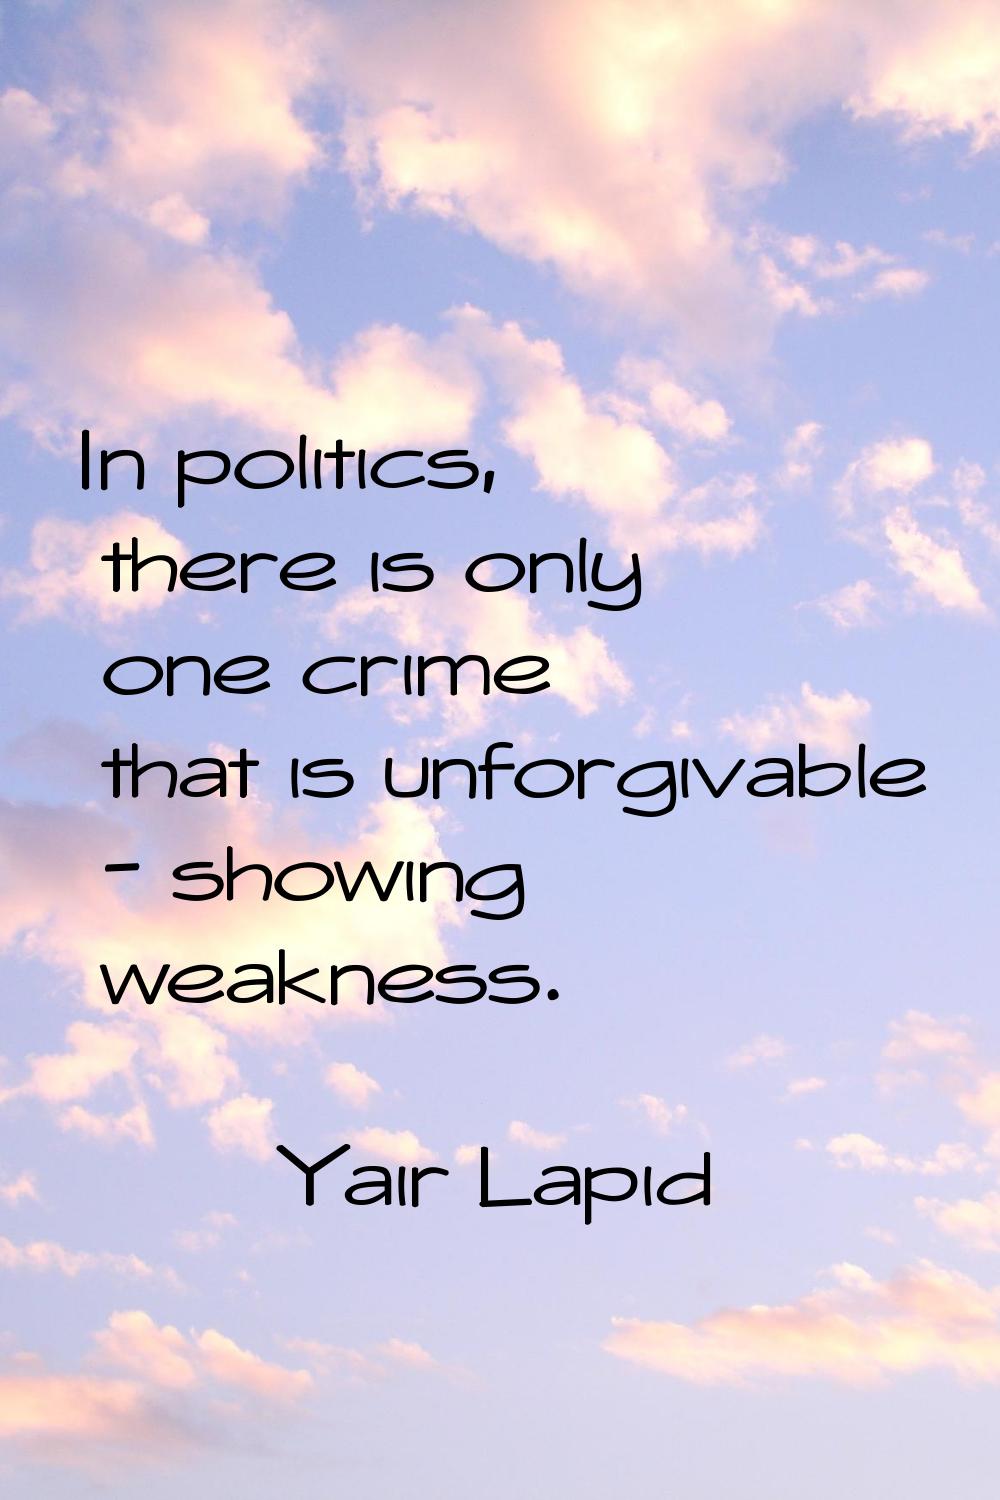 In politics, there is only one crime that is unforgivable - showing weakness.